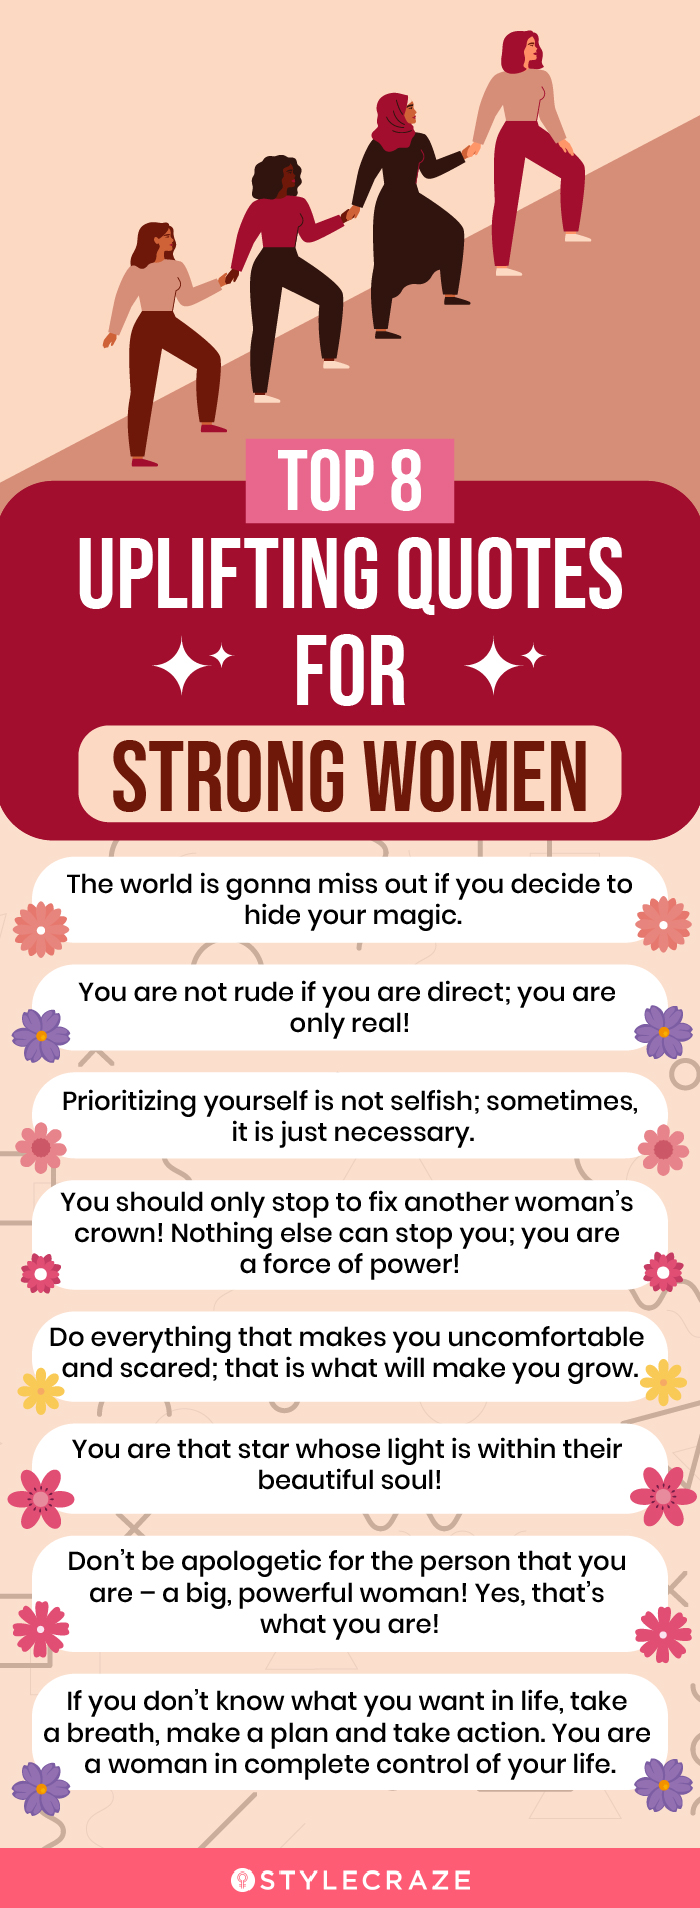 top 8 uplifting quotes for strong women (infographic)